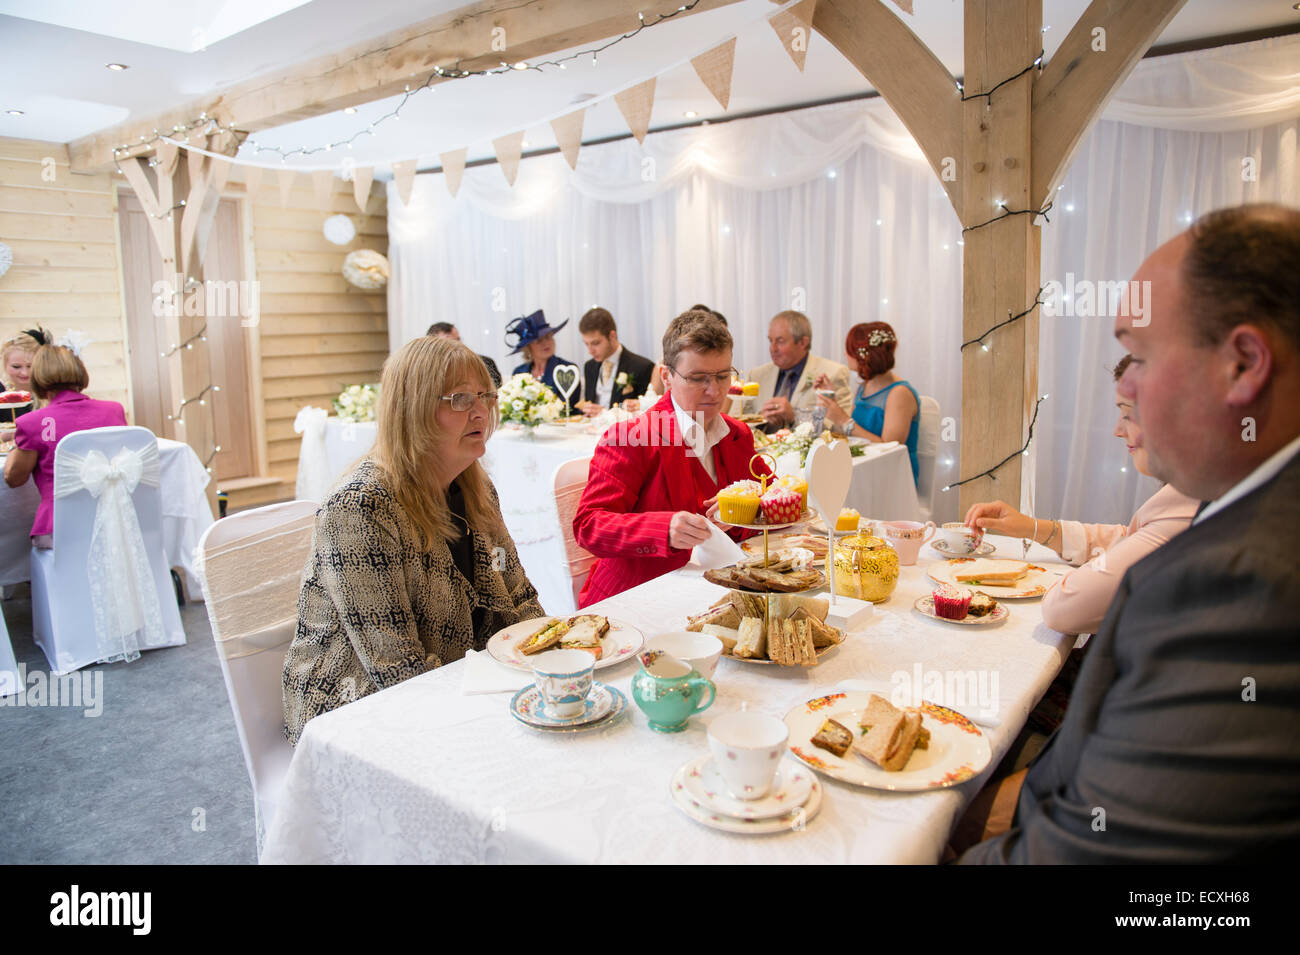 Getting married / Wedding day UK: people enjoying themselves eating sandwiches and drinking tea at an alcohol-free wedding reception celebration party after the wedding service Stock Photo